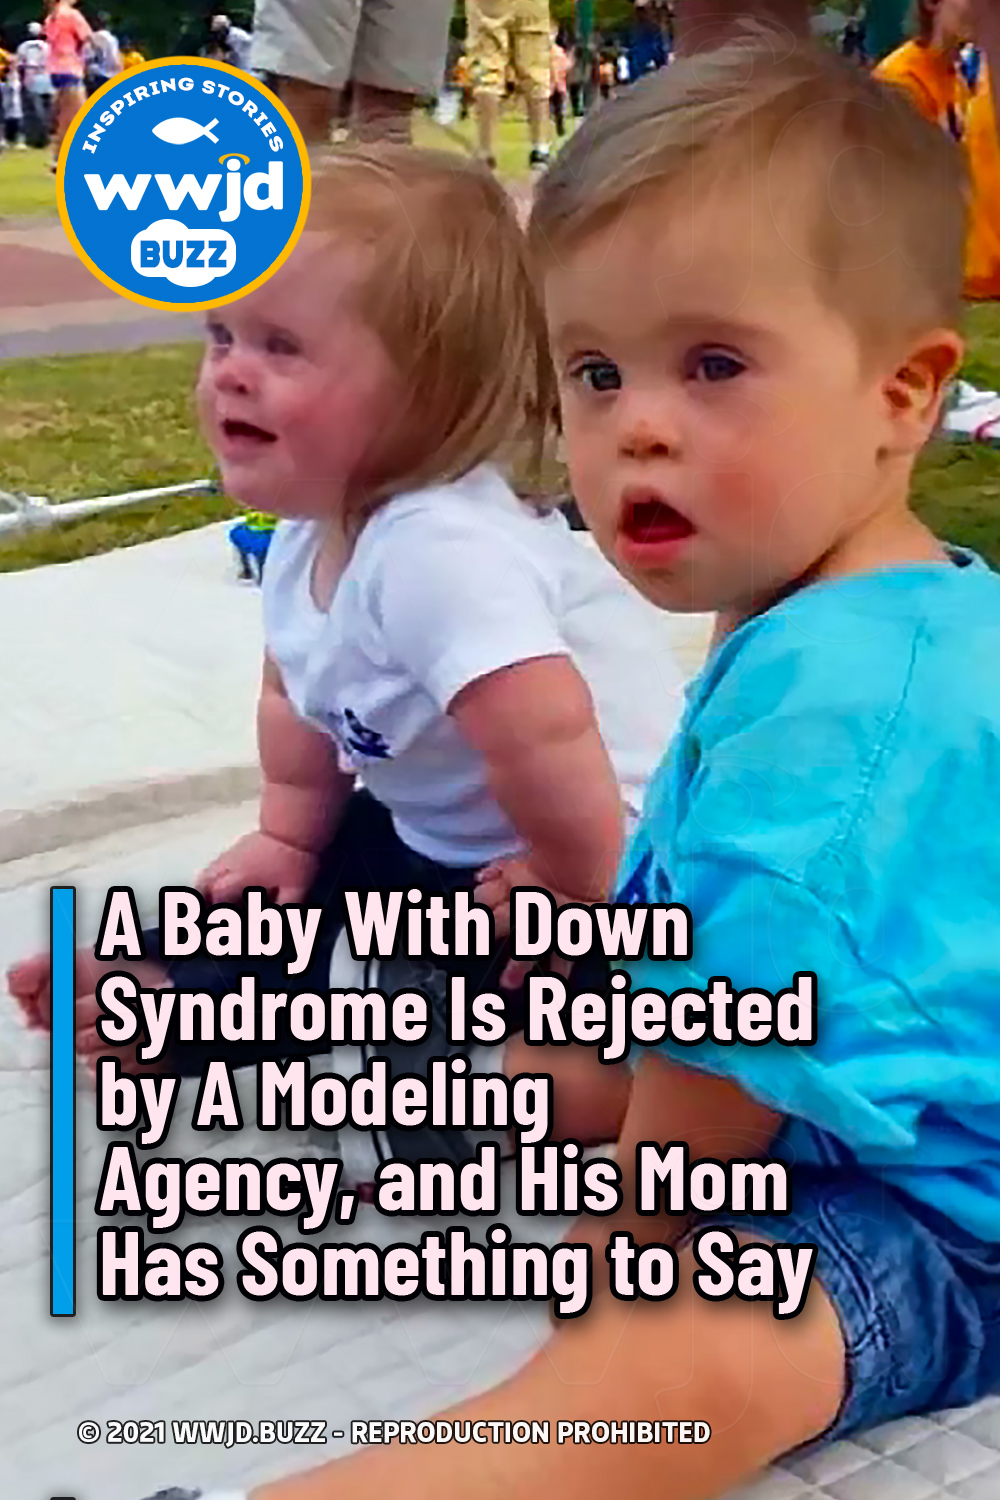 A Baby With Down Syndrome Is Rejected by A Modeling Agency, and His Mom Has Something to Say